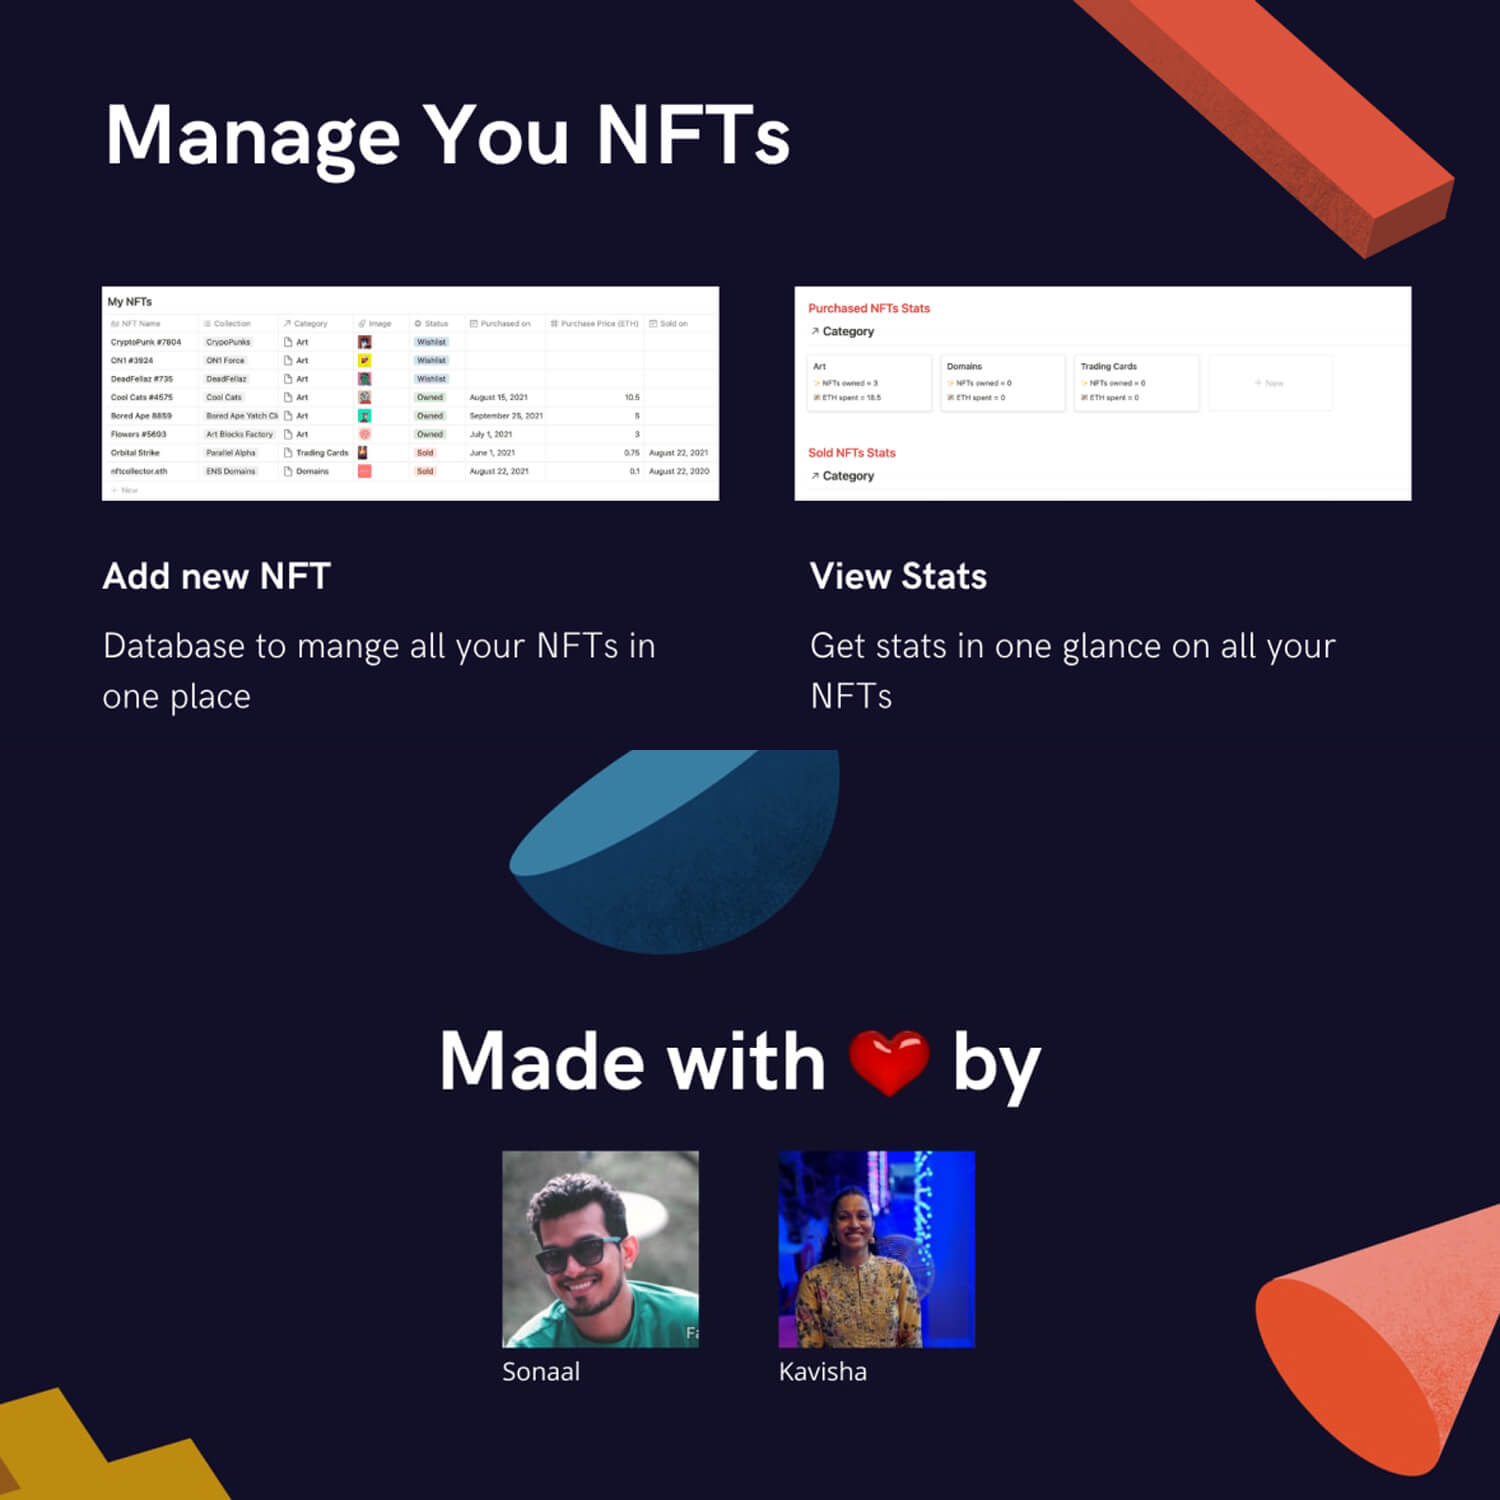 Manage you NFTs, Add new NFT, View Stats.